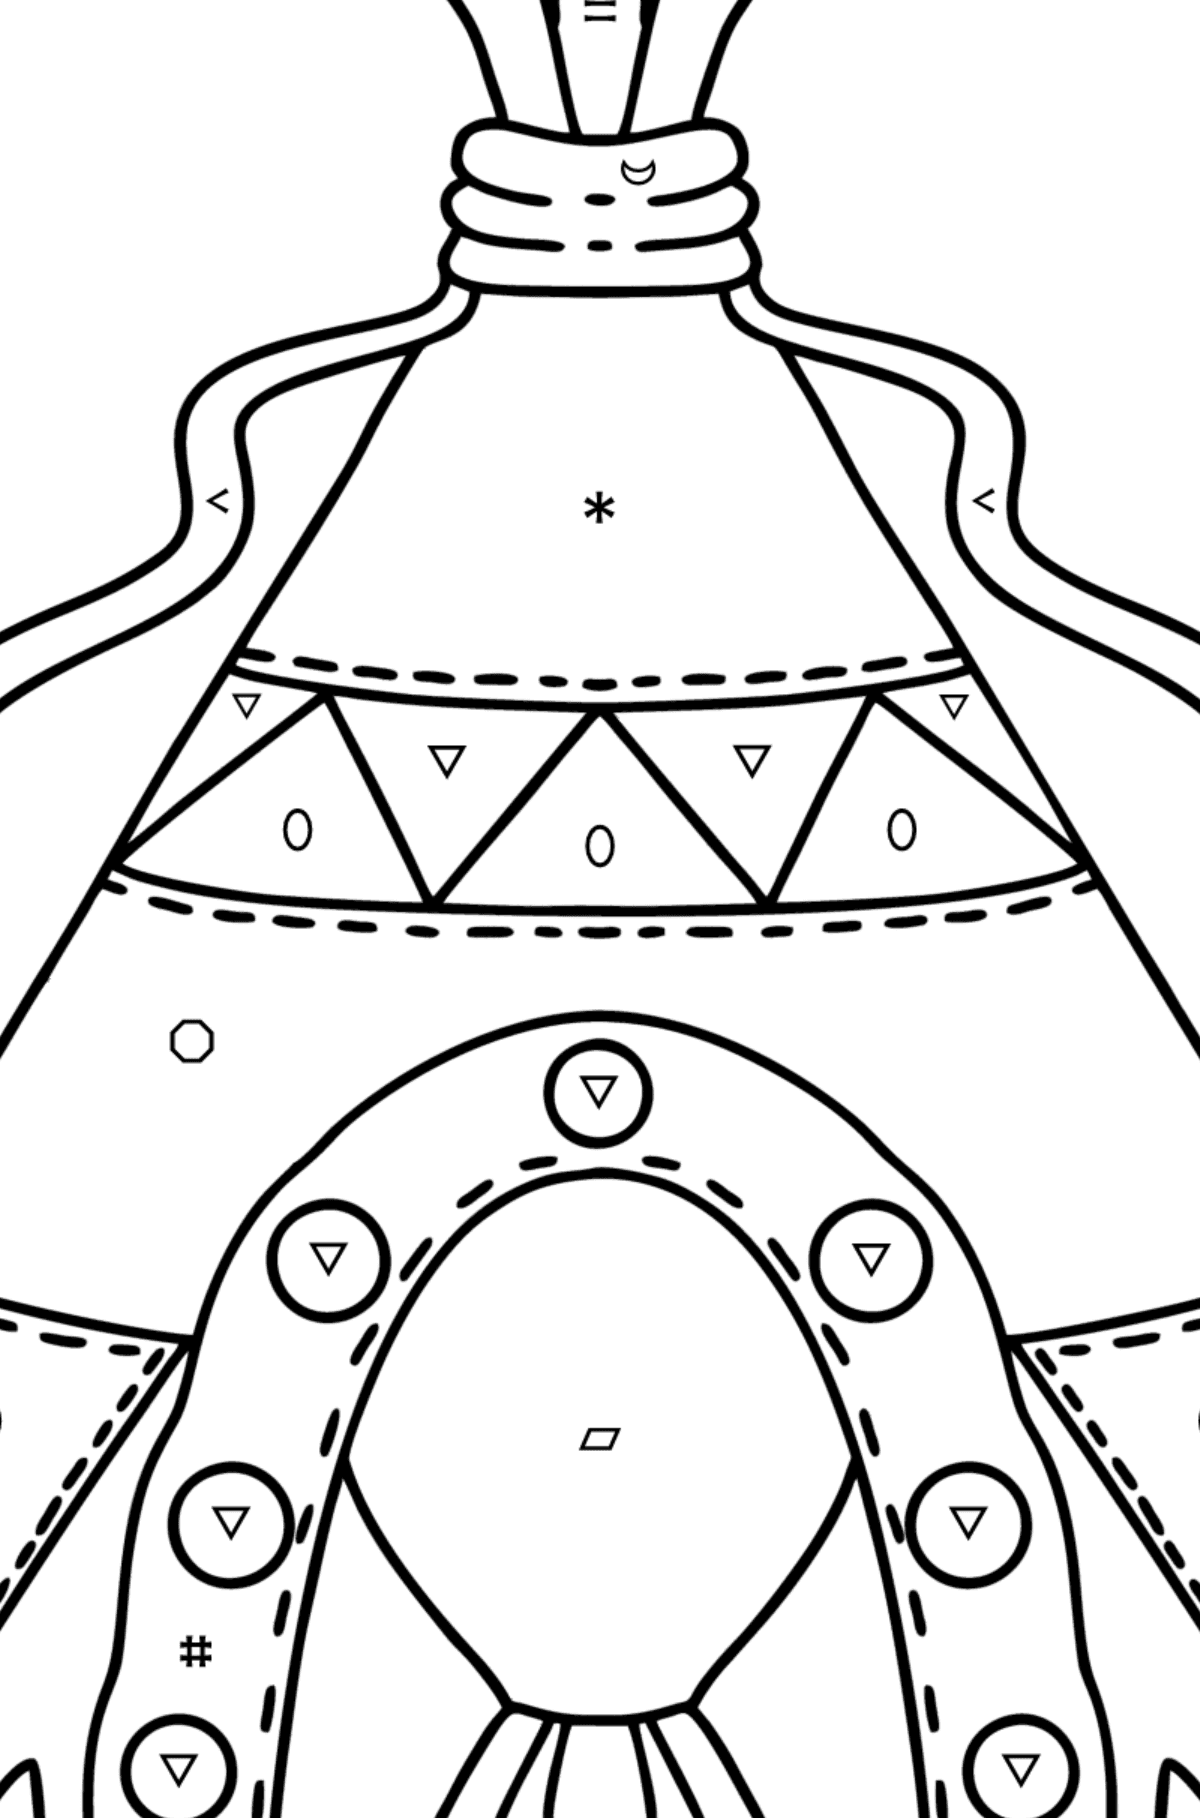 Tepee coloring page - Coloring by Symbols and Geometric Shapes for Kids